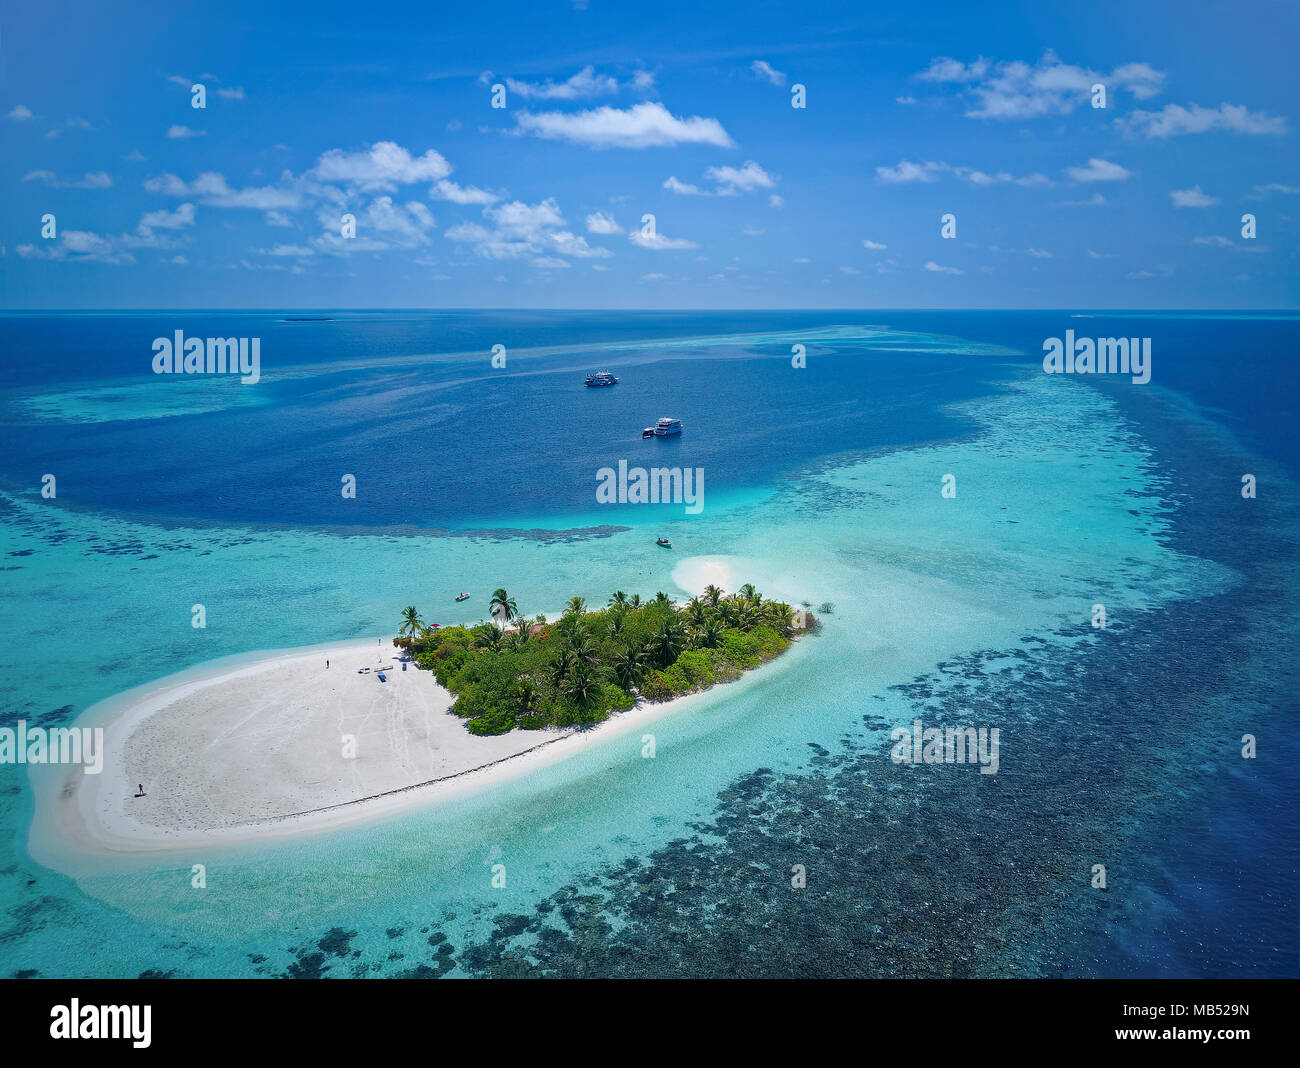 Uninhabited palm island, sandy beach all around, offshore coral reef, diving boat in the back, Ari atoll, Indian Ocean, Maldives Stock Photo